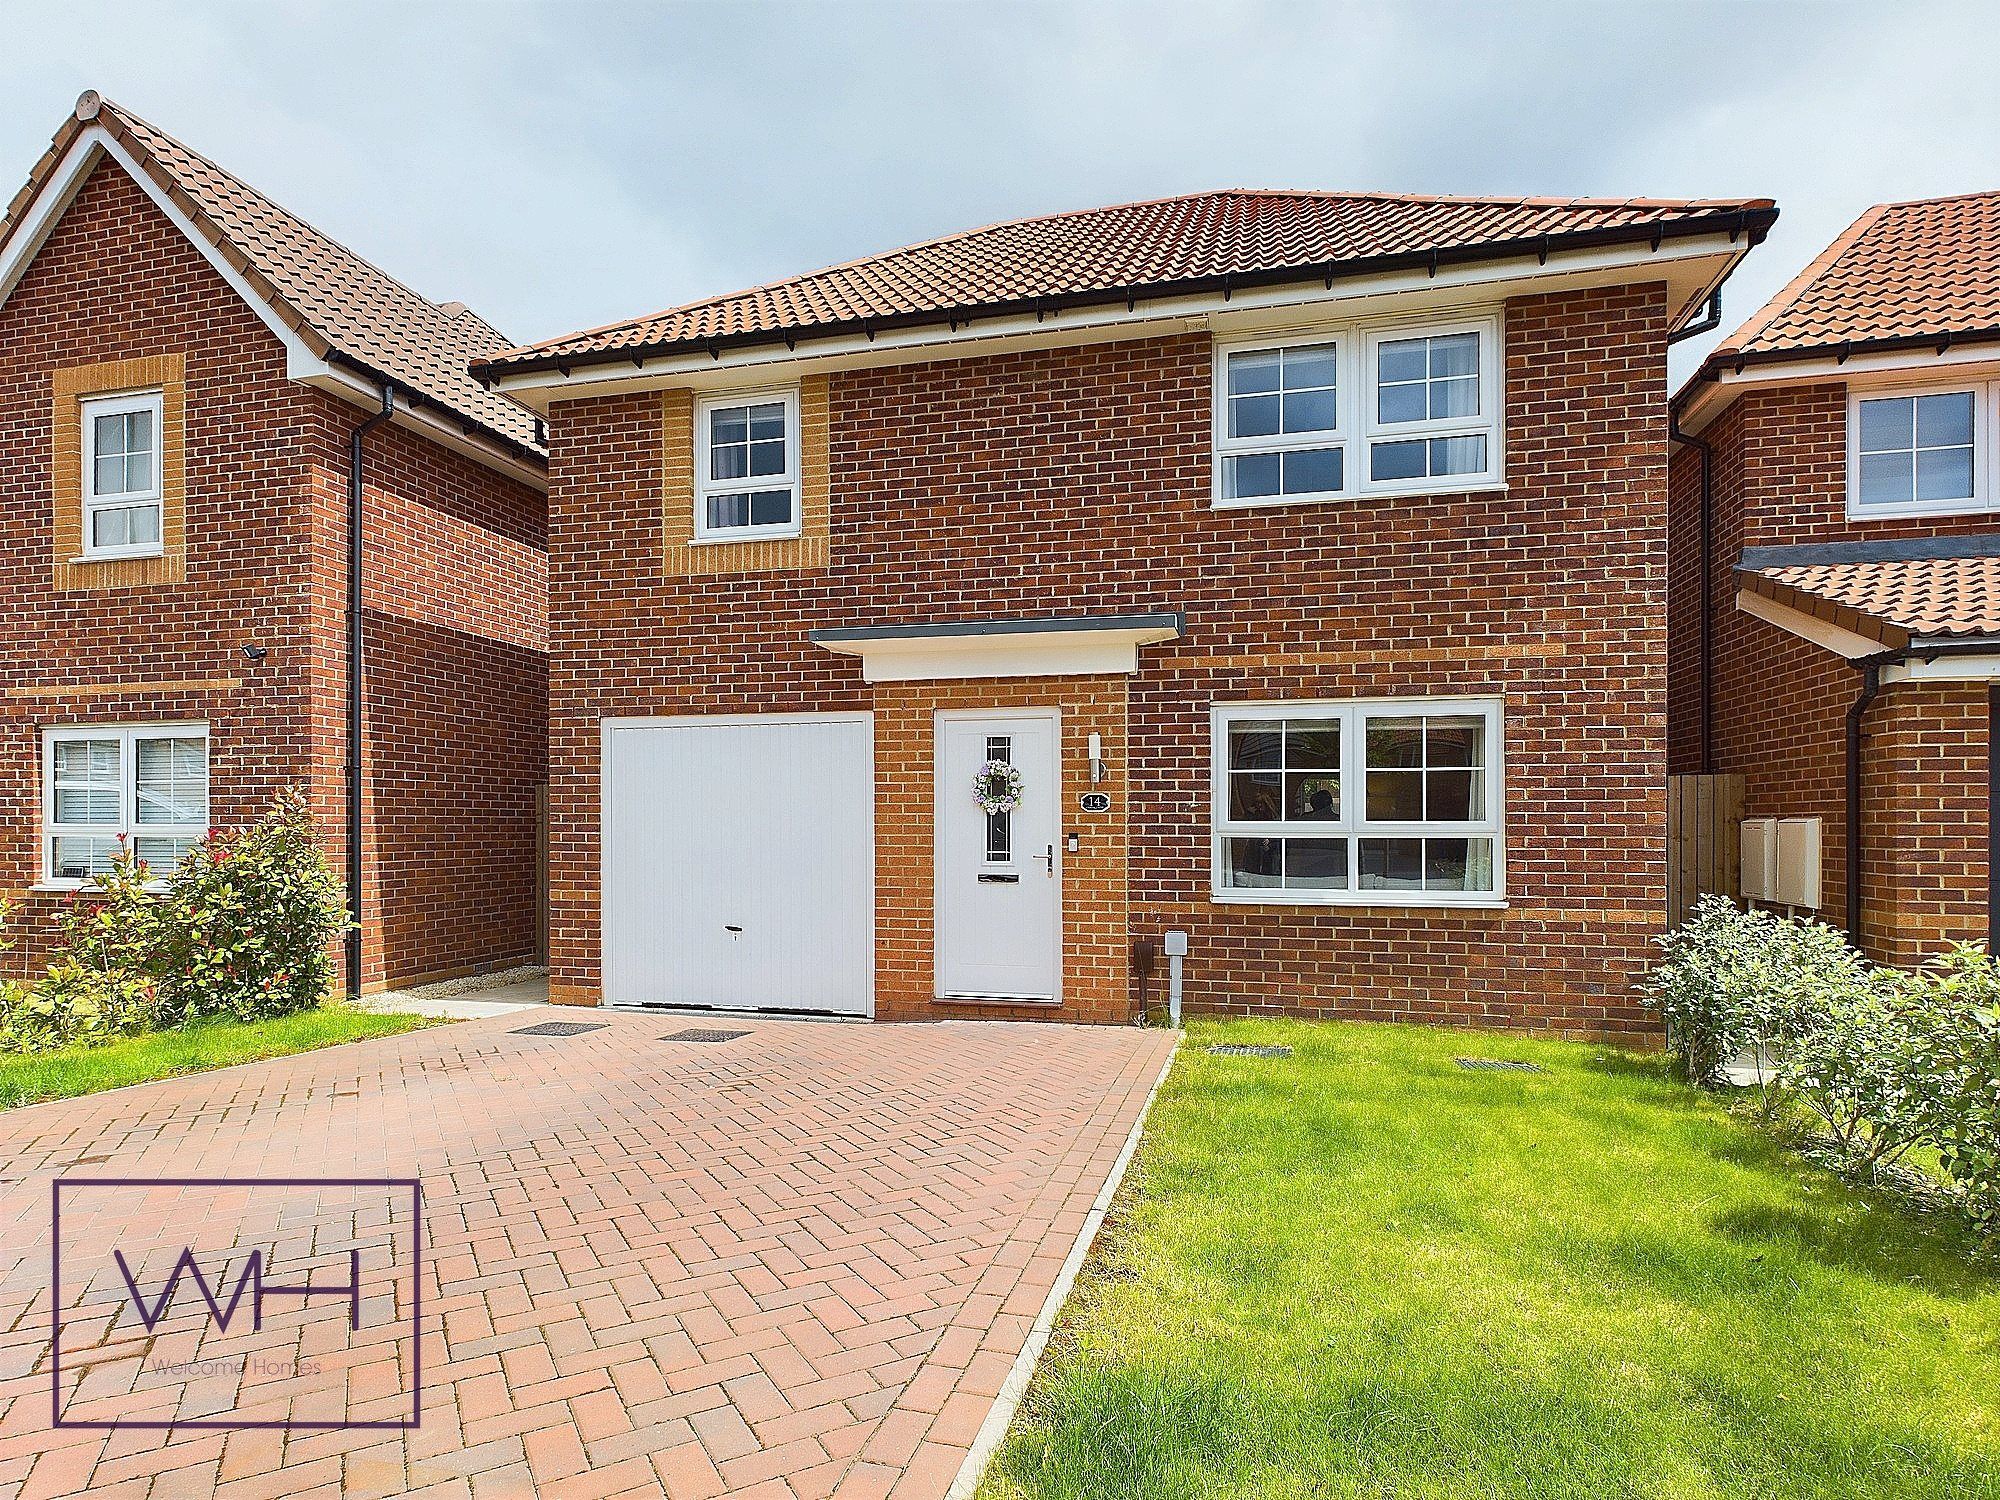 Oxbow Drive , Wheatley, Doncaster, DN2 4EF